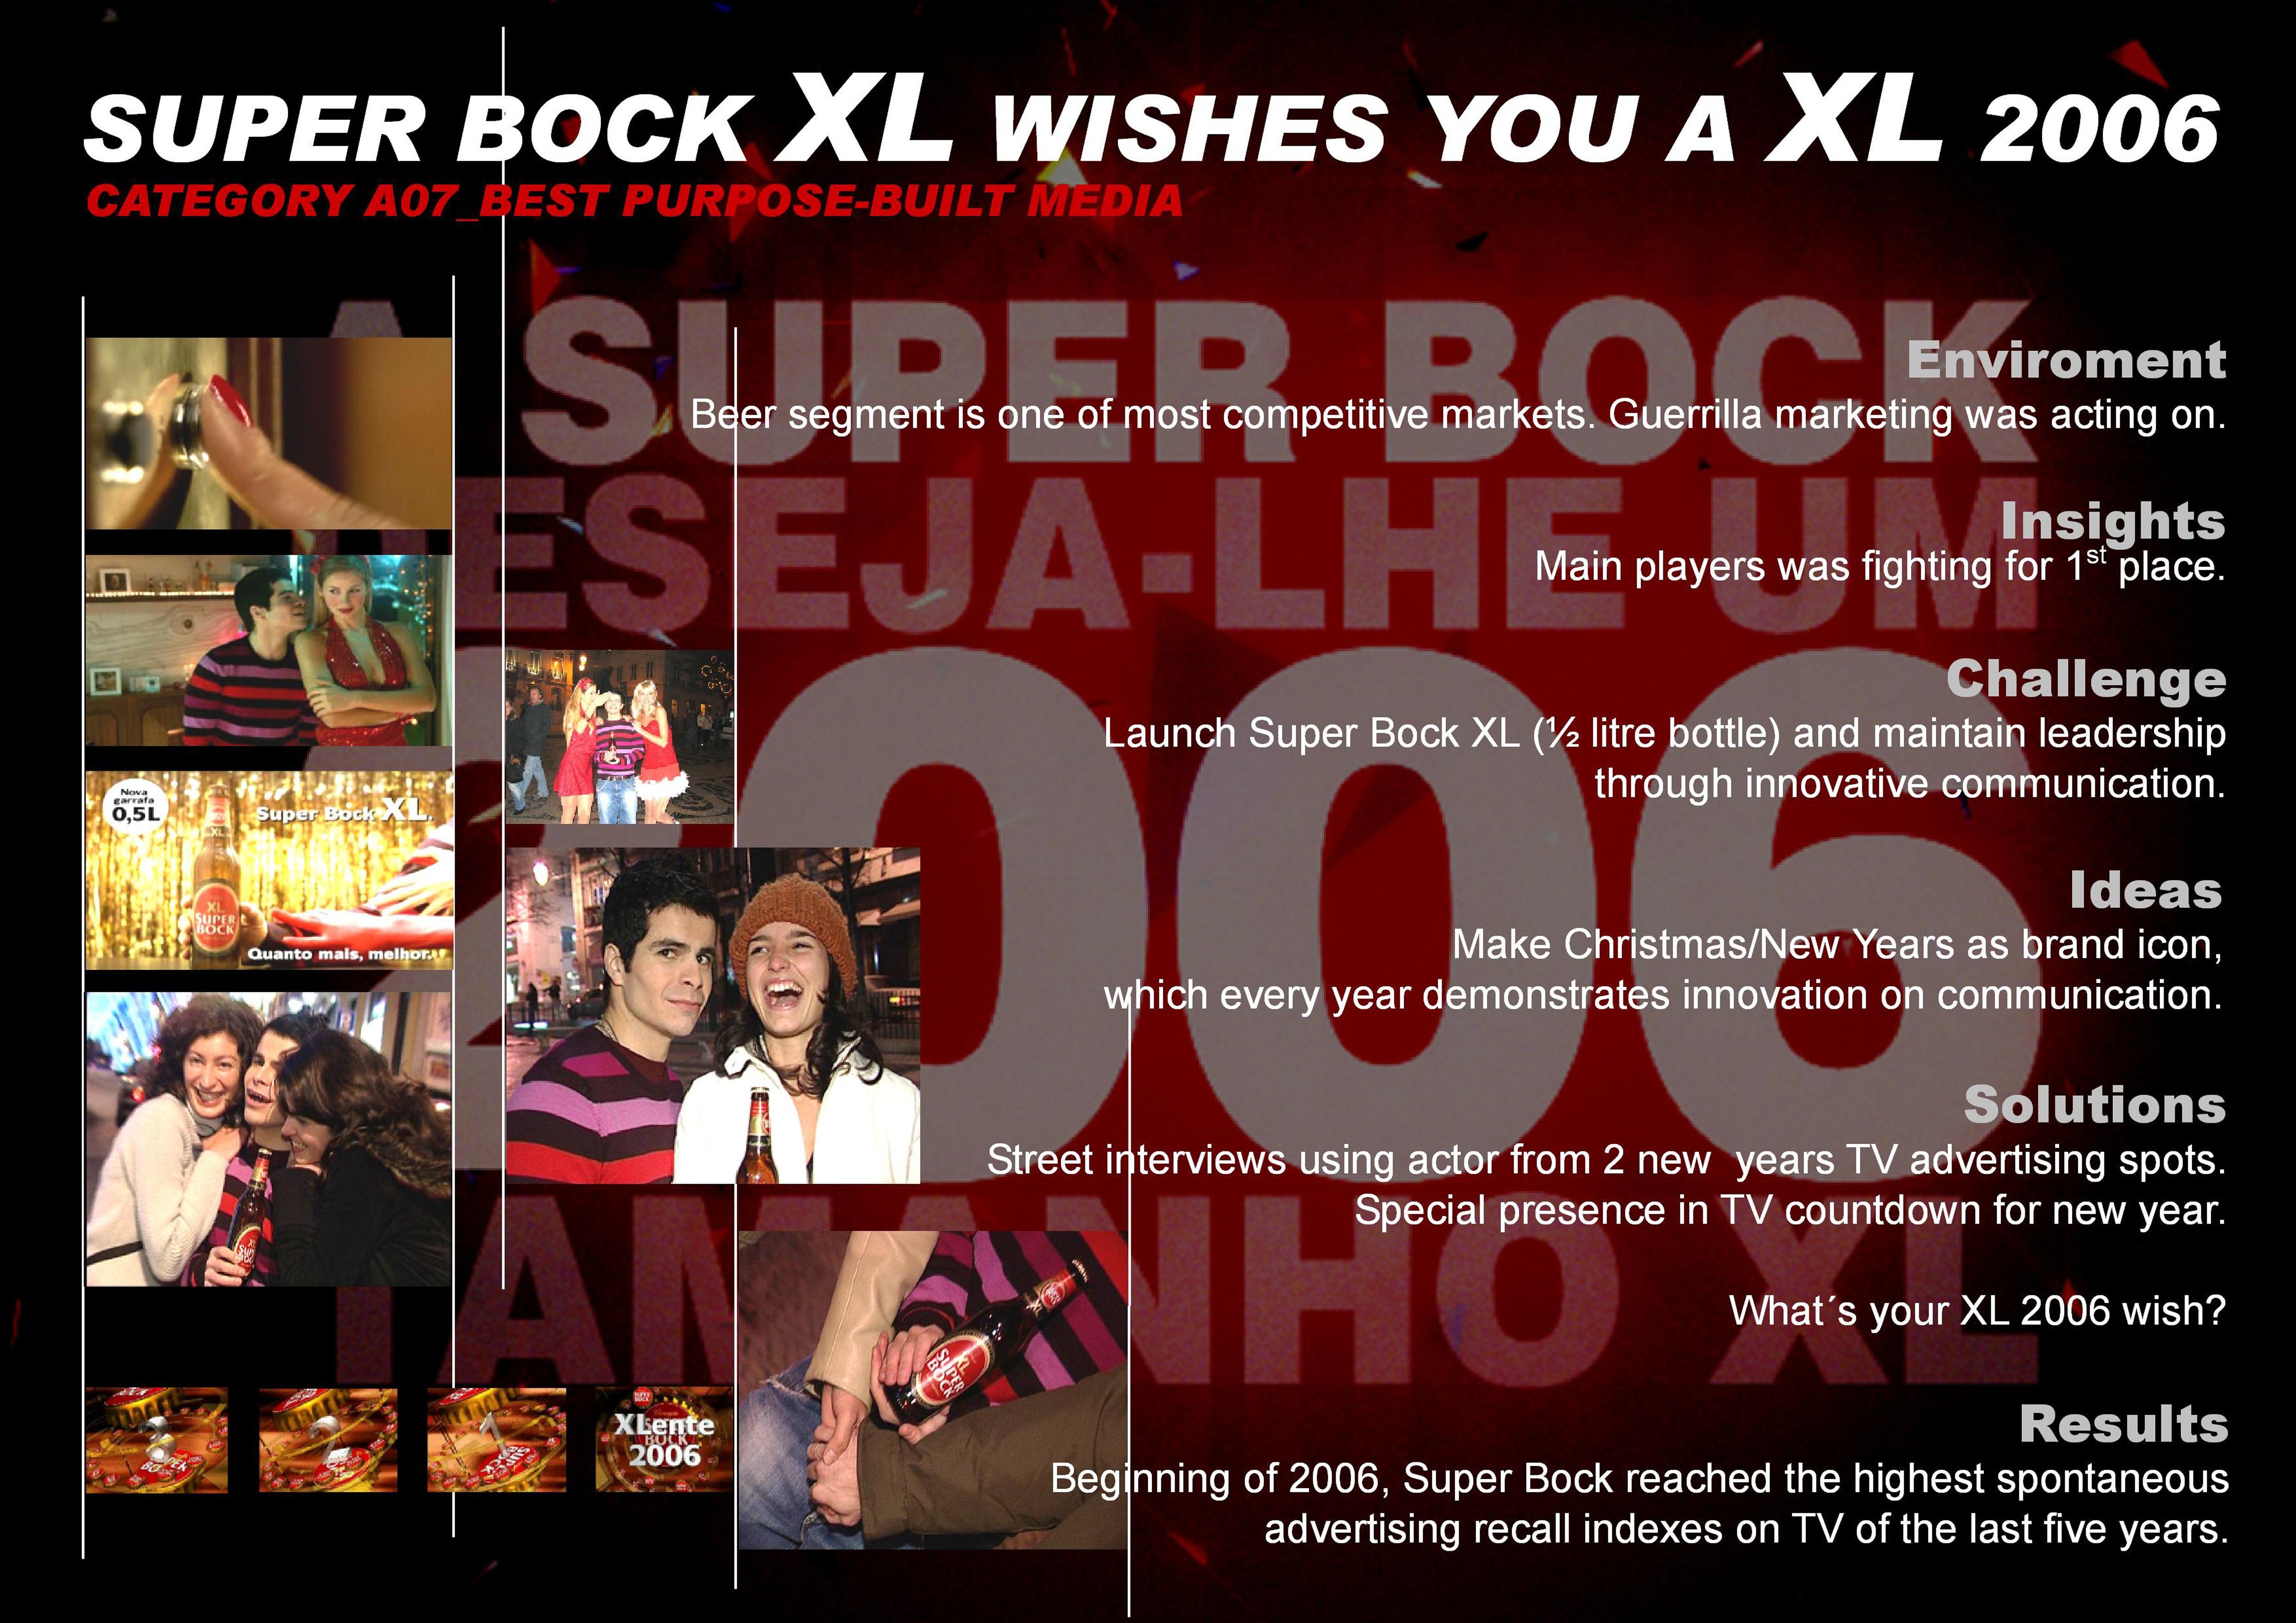 SUPER BOCK WISHES YOU AN XL 2006